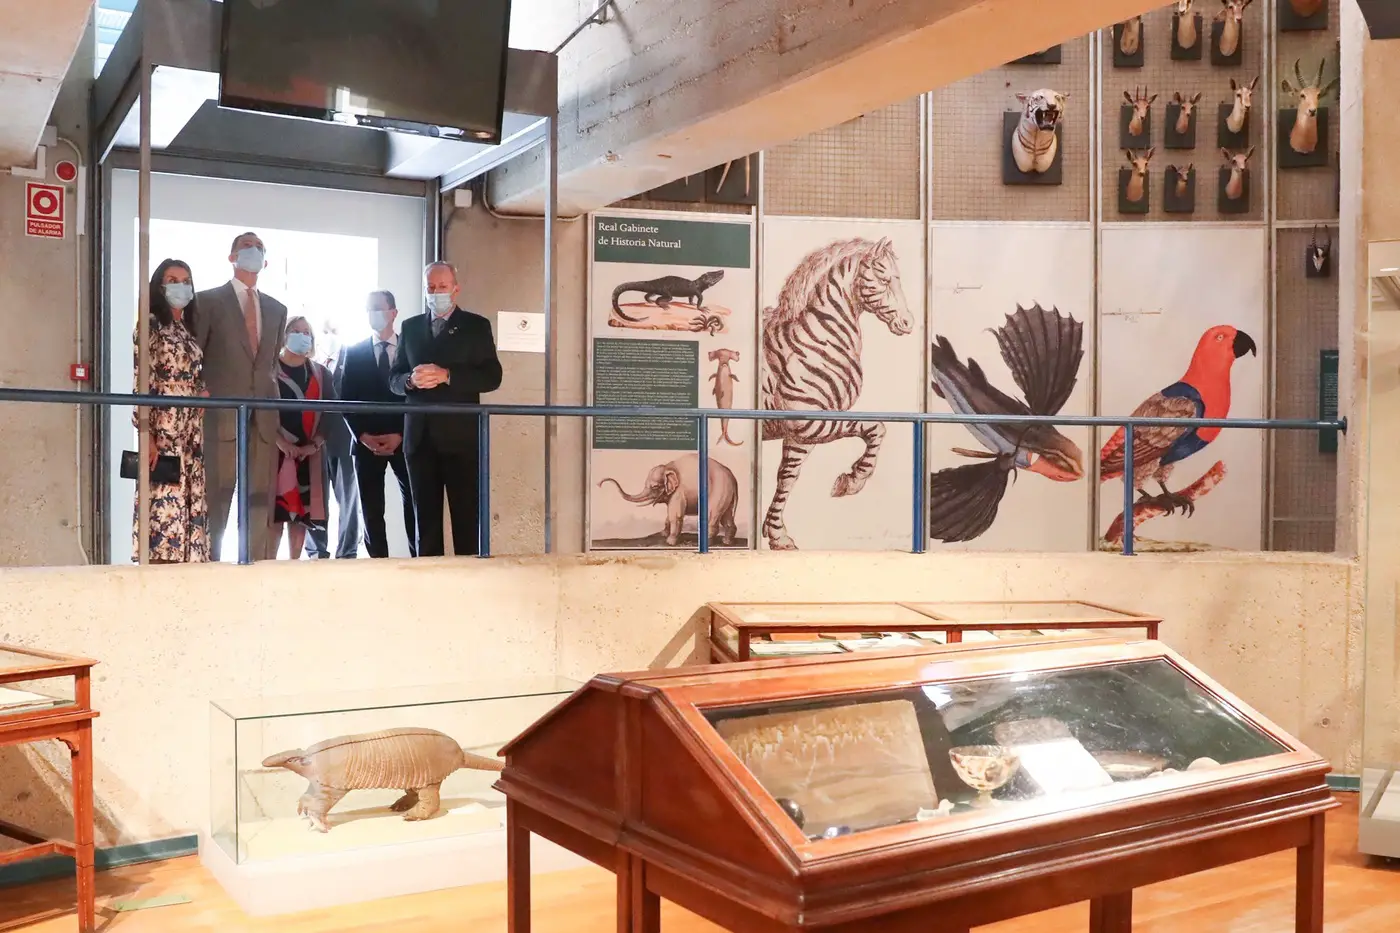 King Felipe and Queen Letizia visited the Natural Science museum